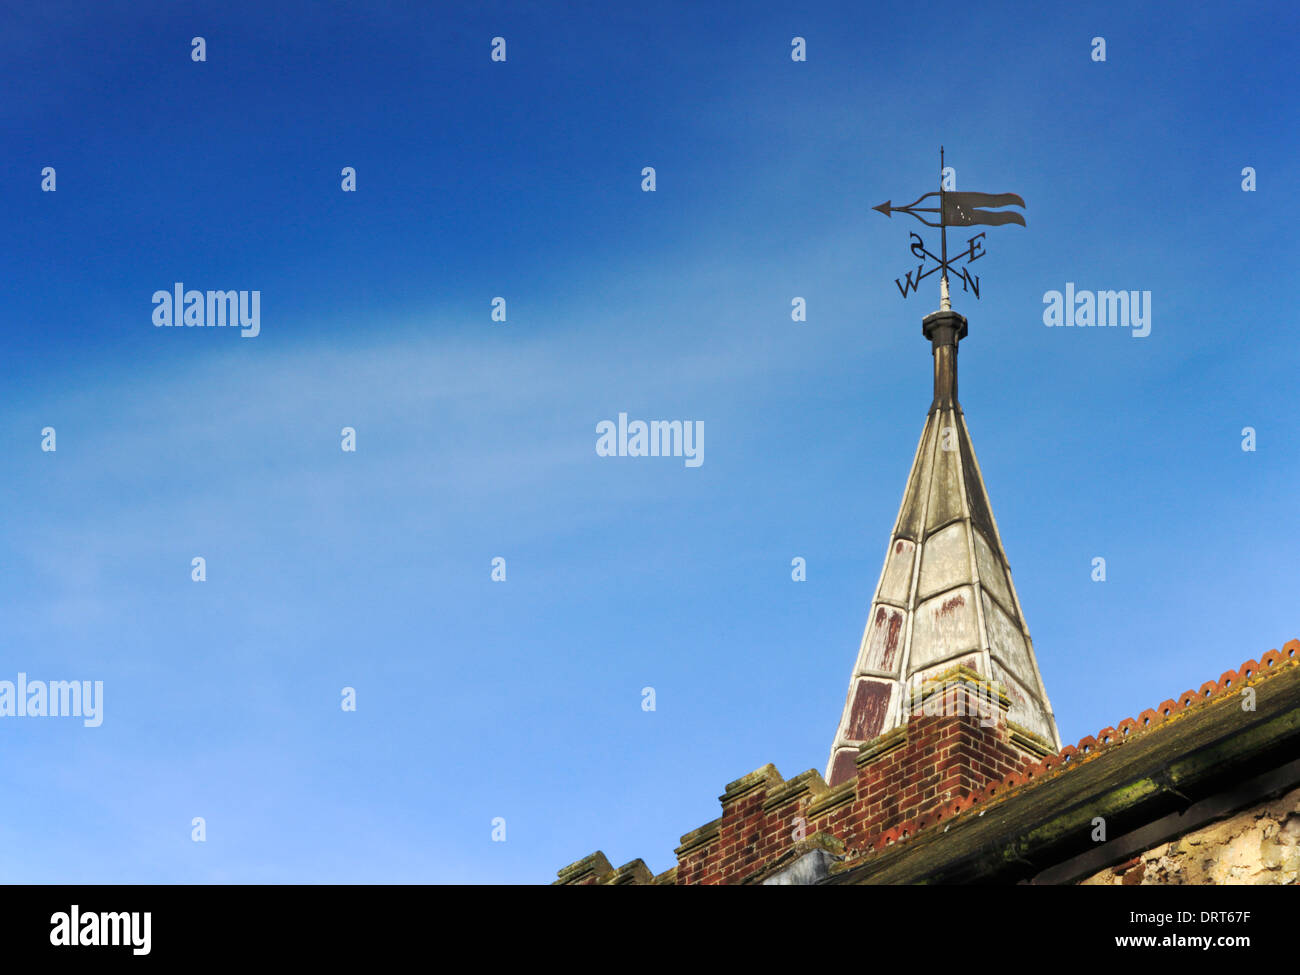 A view of the small spire and weather vane on the tower of the church of St Edmund at Costessey, Norfolk, England, UK. Stock Photo